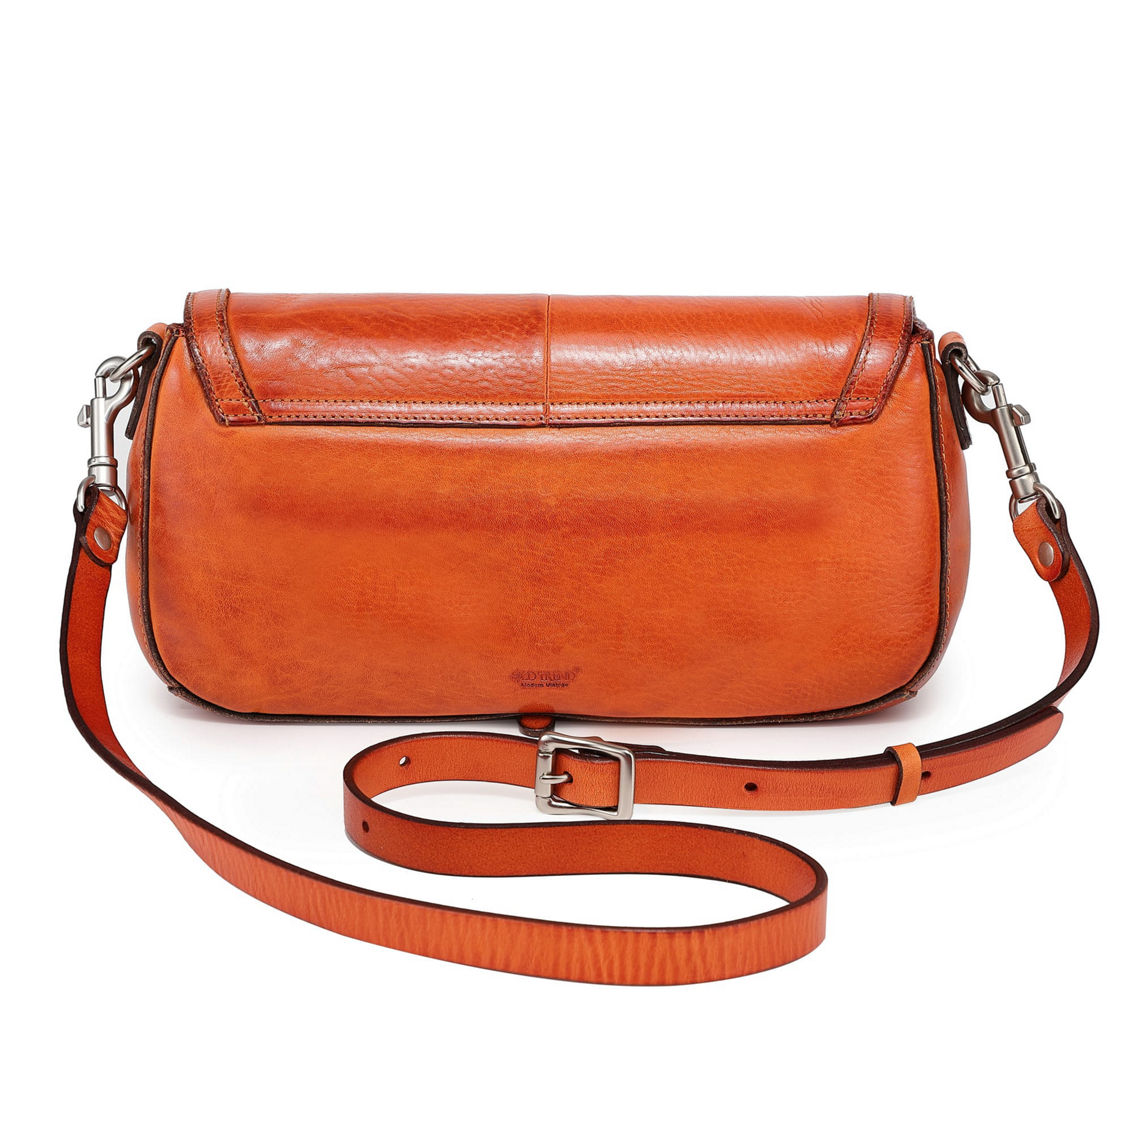 Old Trend Abutilon Convertible Leather Crossbody - Image 5 of 5